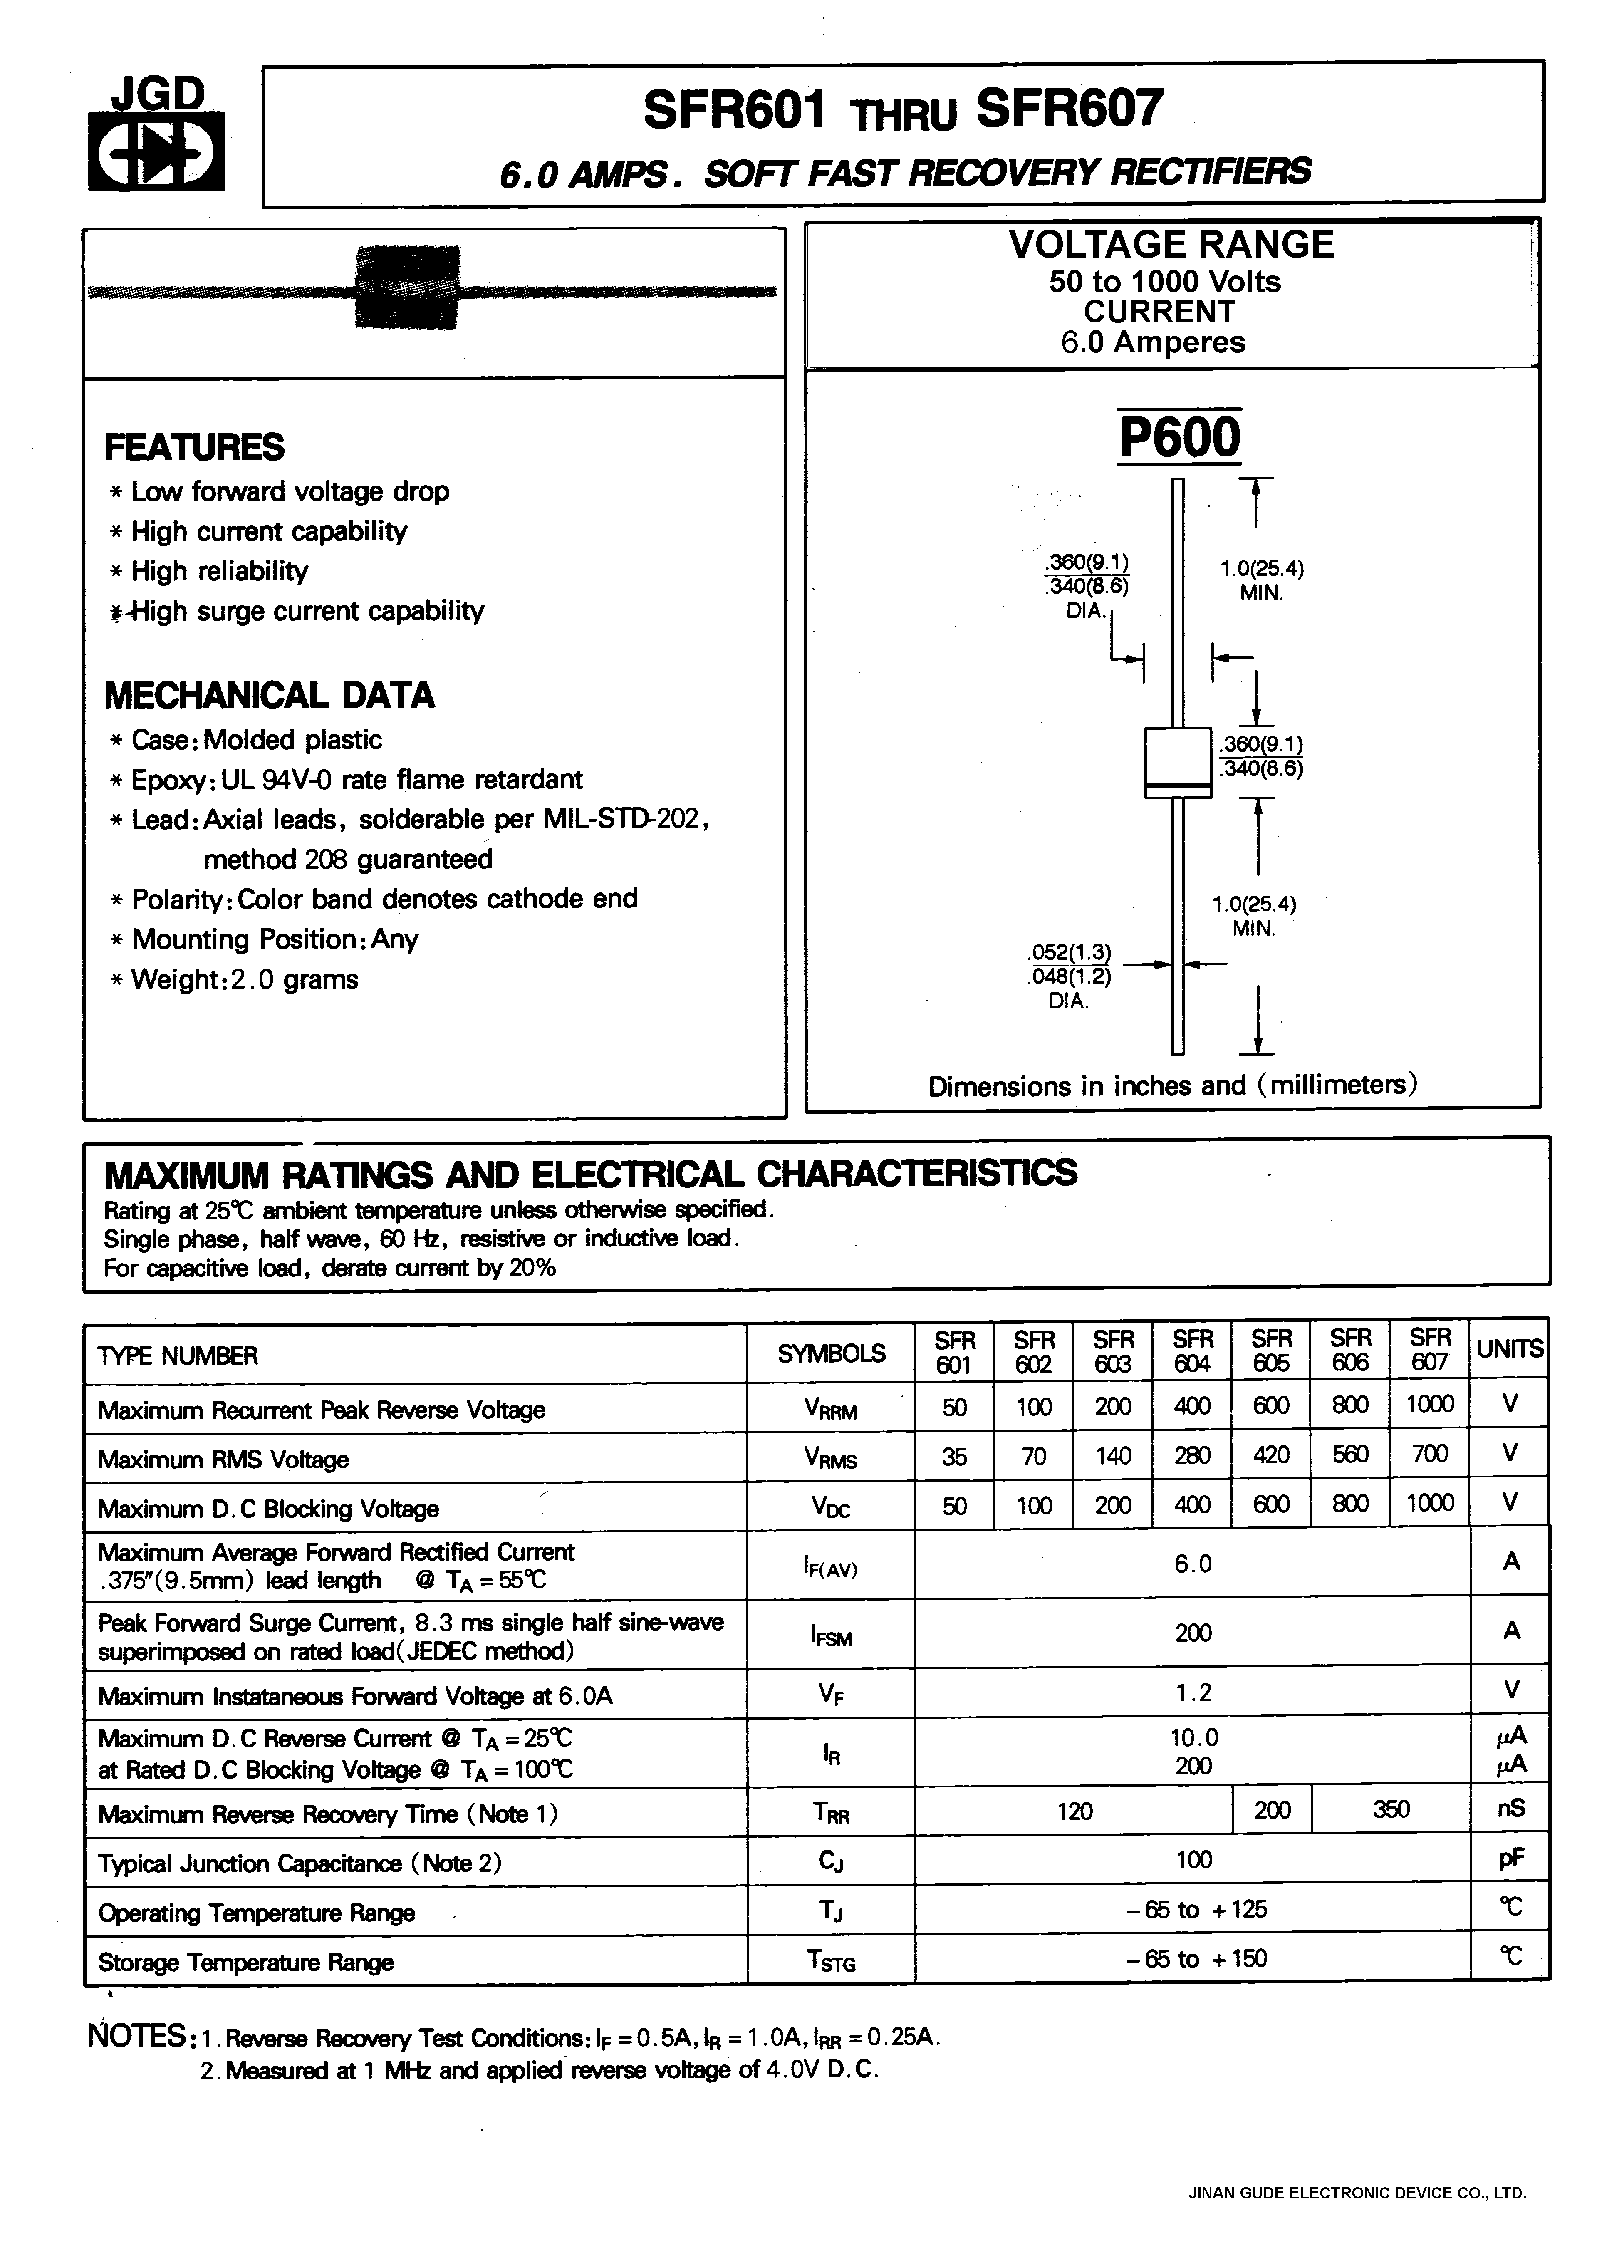 Datasheet SFR601 - 6.0 AMPS. SOFT FAST RECOVERY RECTIFIERS page 1